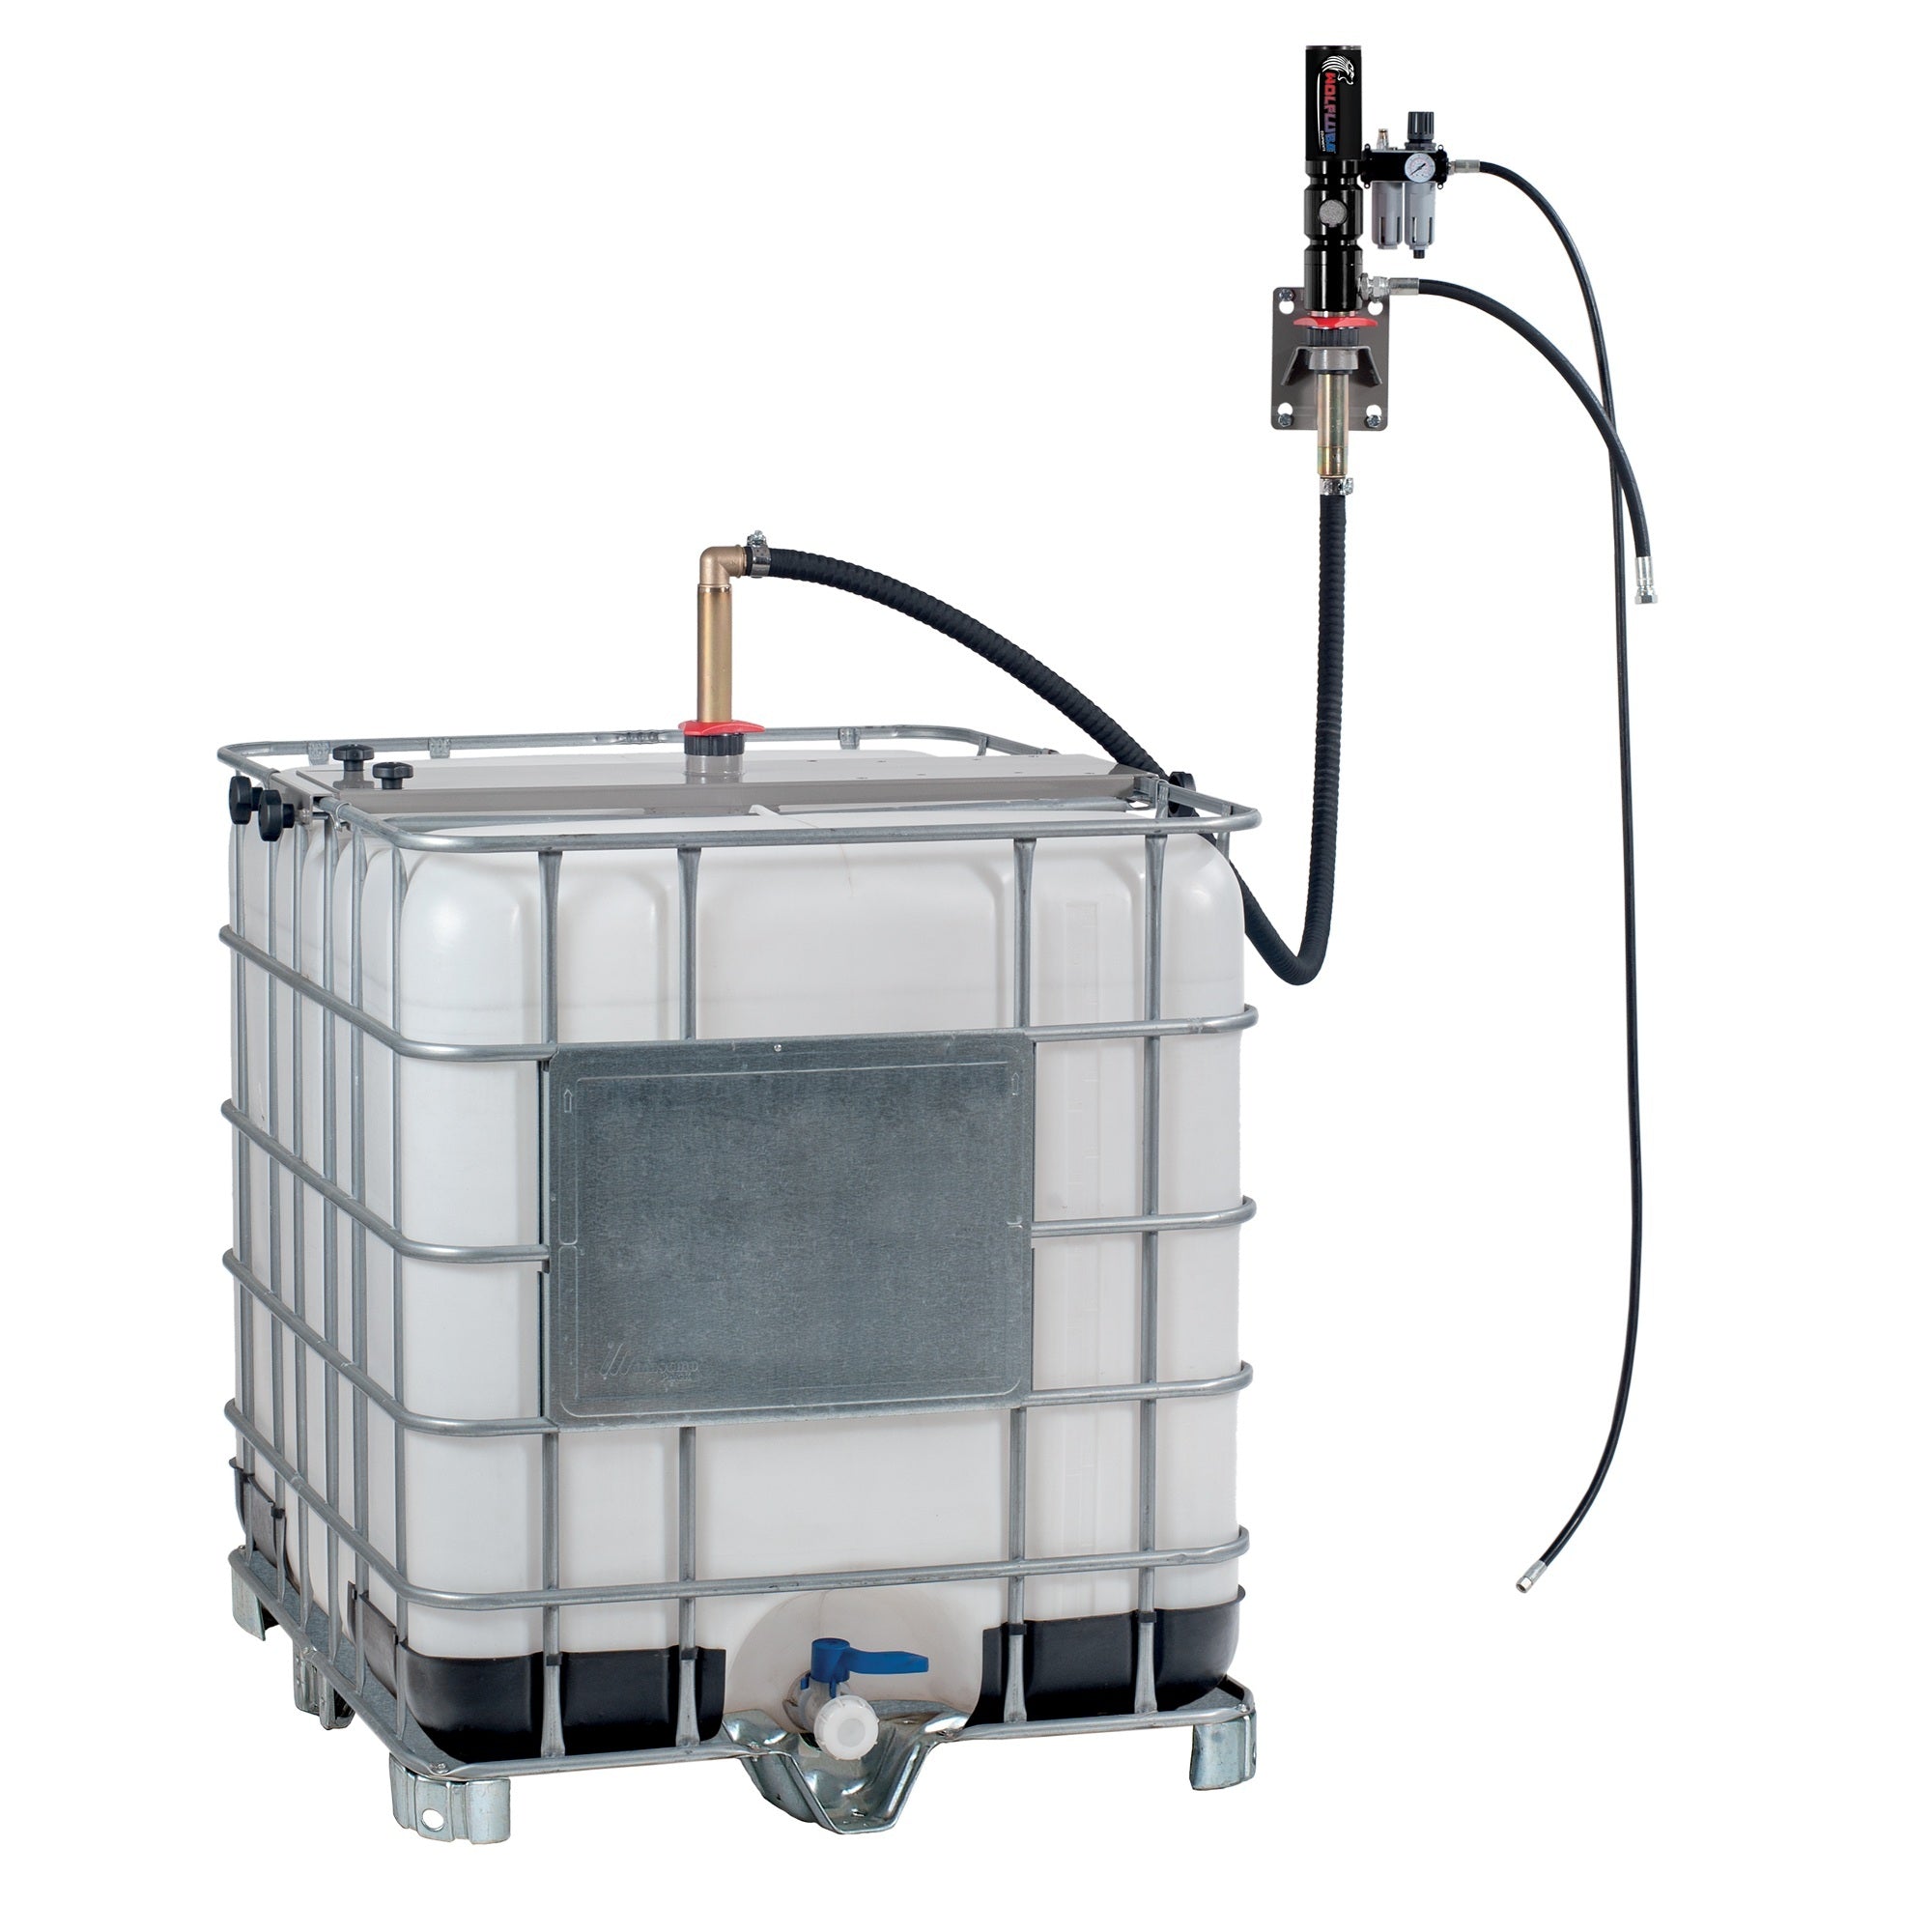 Oil Kit - Tote Mounted - 5:1 - For 275 gal Tote - Digital Control